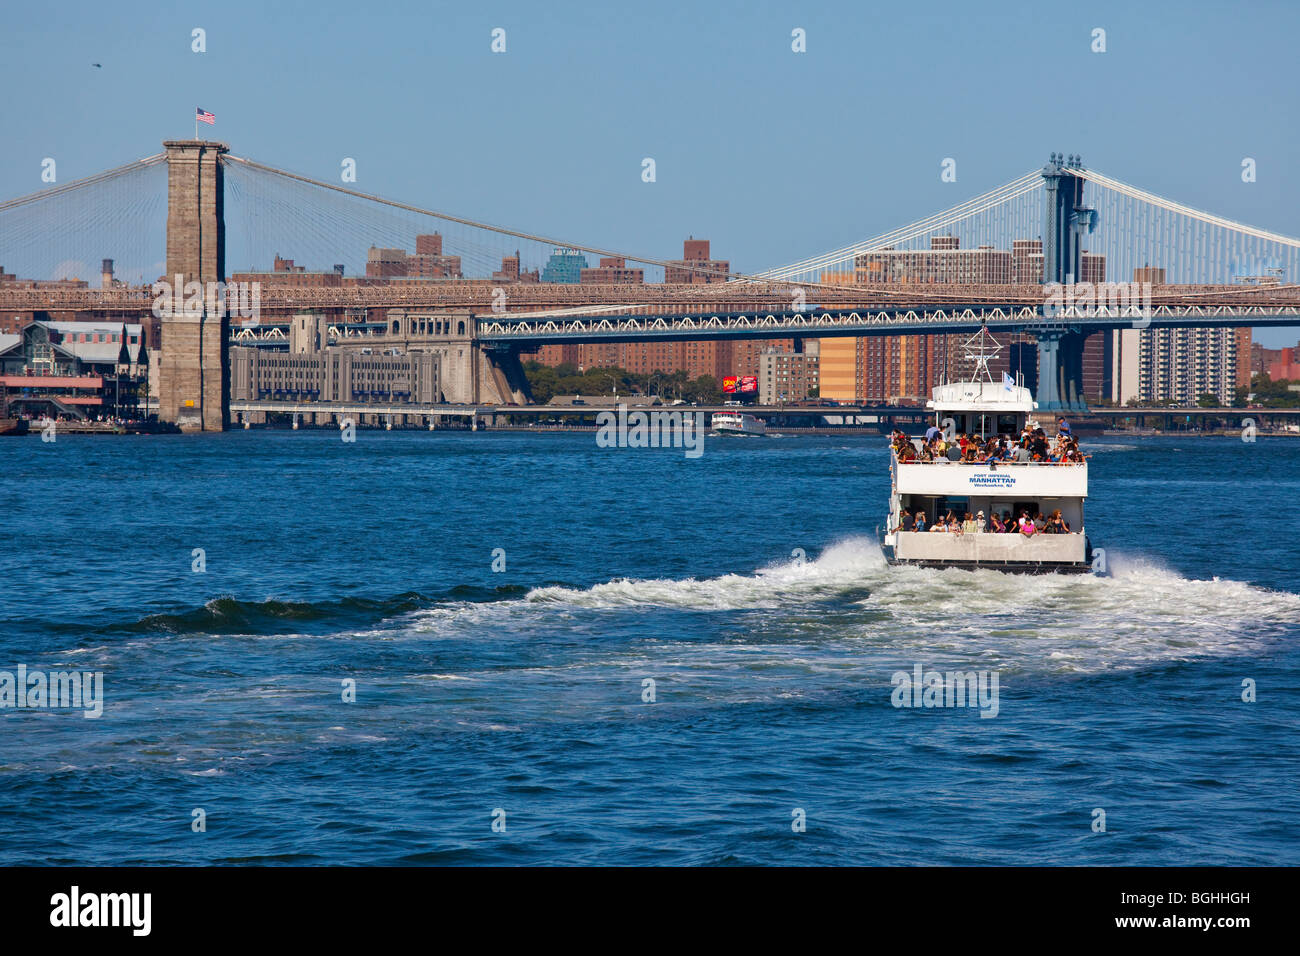 Tourists on a boat tour in the East River in New York City Stock Photo